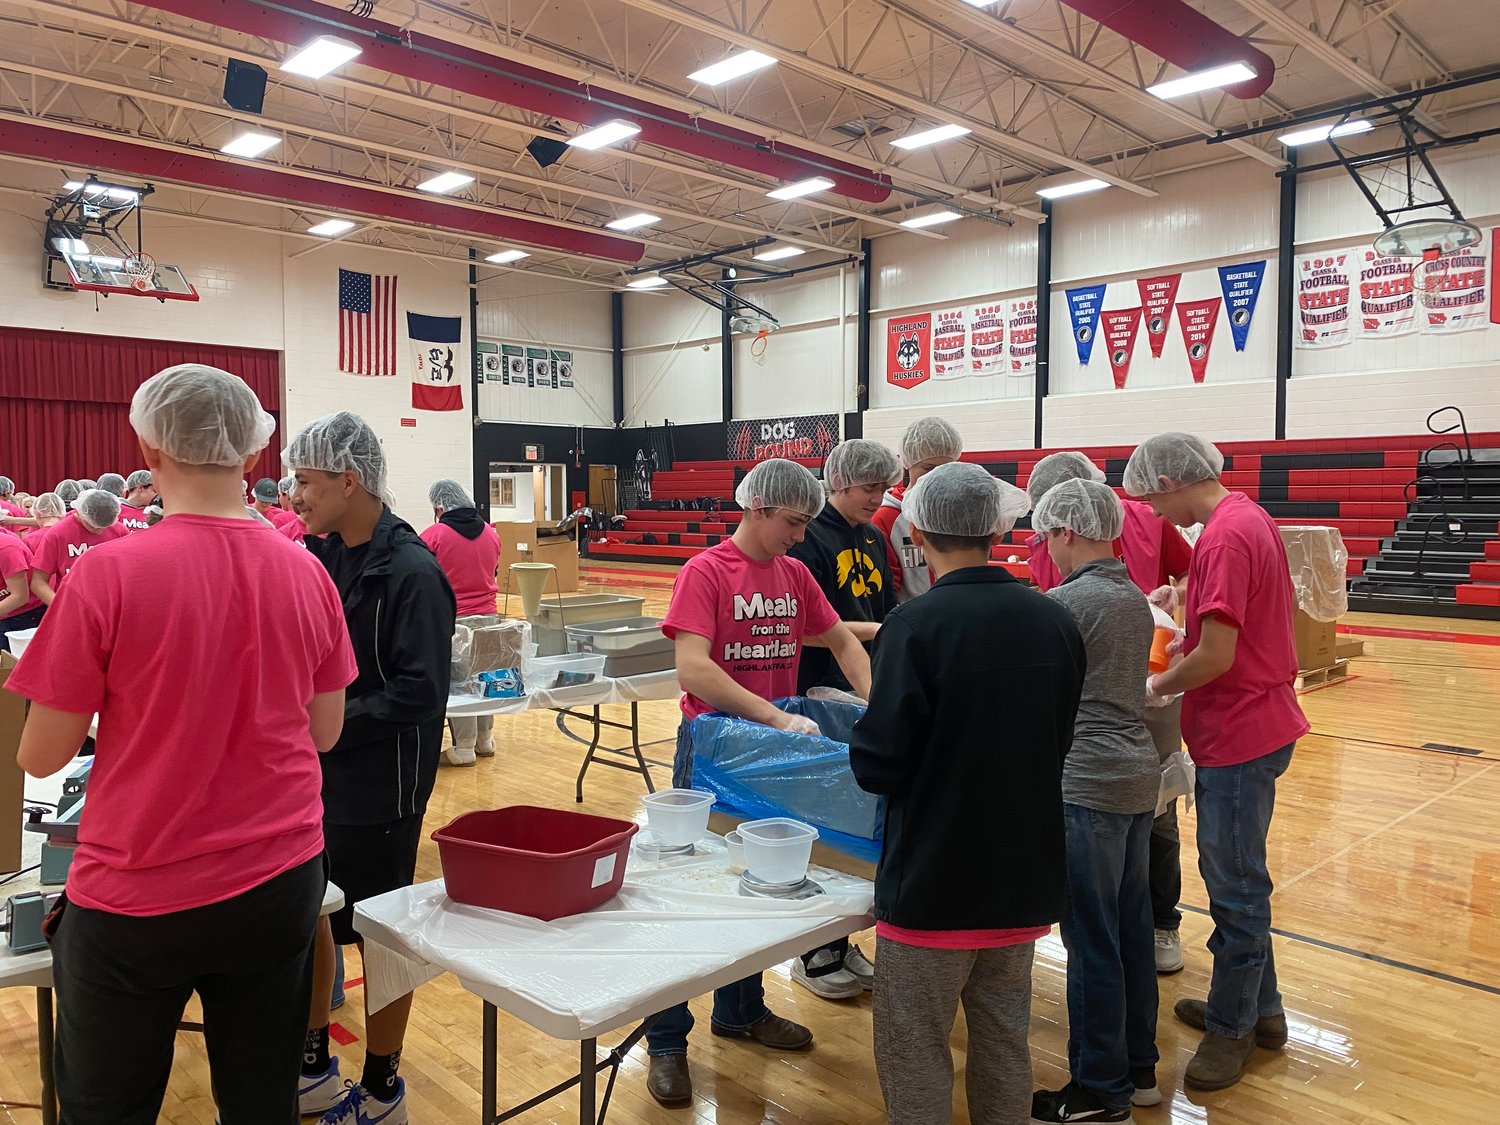 Two more tables than last year, for a total of 10, were needed to package 40,000 meals in the Highland gym.